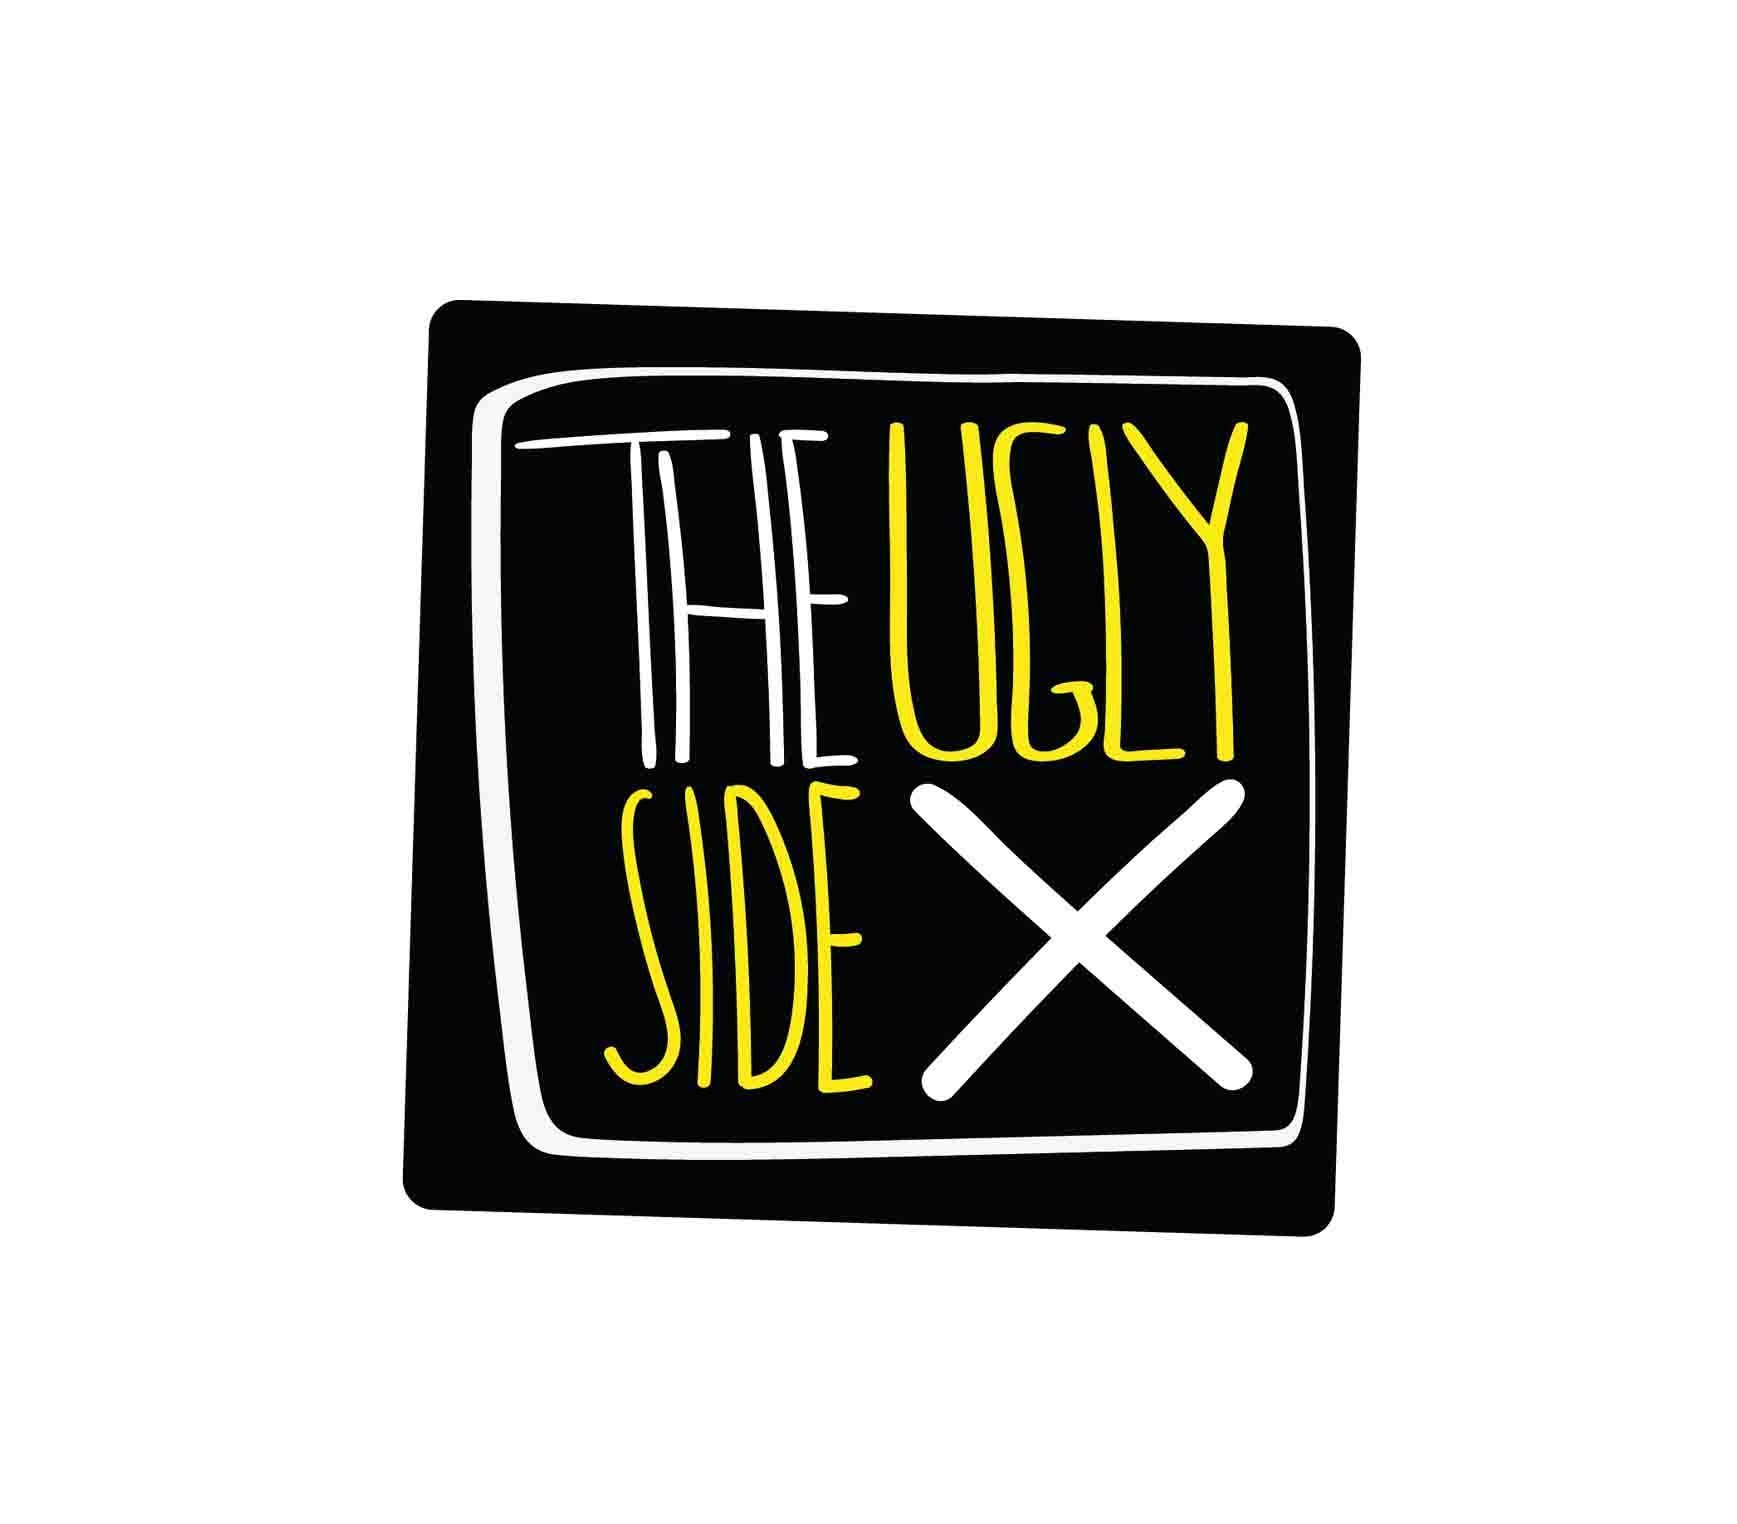 The Ugly side